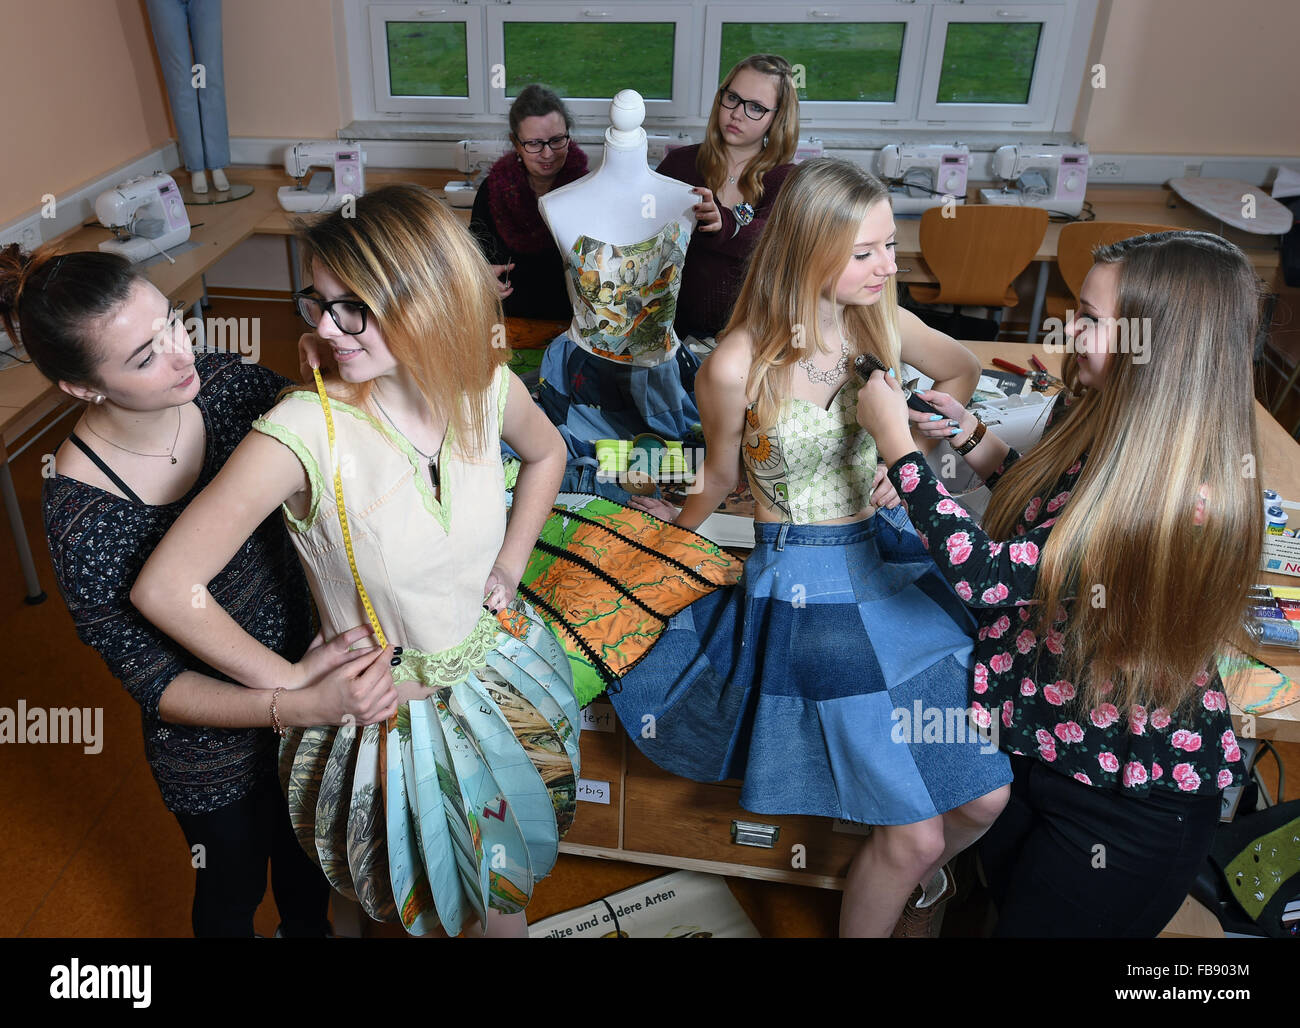 Bad Lauchstaedt, Germany. 11th Jan, 2016. Pupils Anne Michalsky (l) and Lea Recha (r) arrange fellow pupils and models Alina Raue (2.f.r.) and Lydia Ulrich at the Goethe Schule in Bad Lauchstaedt, Germany, 11 January 2016. Under the direction of the Schule fuer Mode und Design fashion school in Magdeburg, the pupils are making clothes for Fashion Week. The 40-minute show is due to take place in Berlin on 17 January. Photo: Hendrik Schmidt/ZB/dpa/Alamy Live News Stock Photo